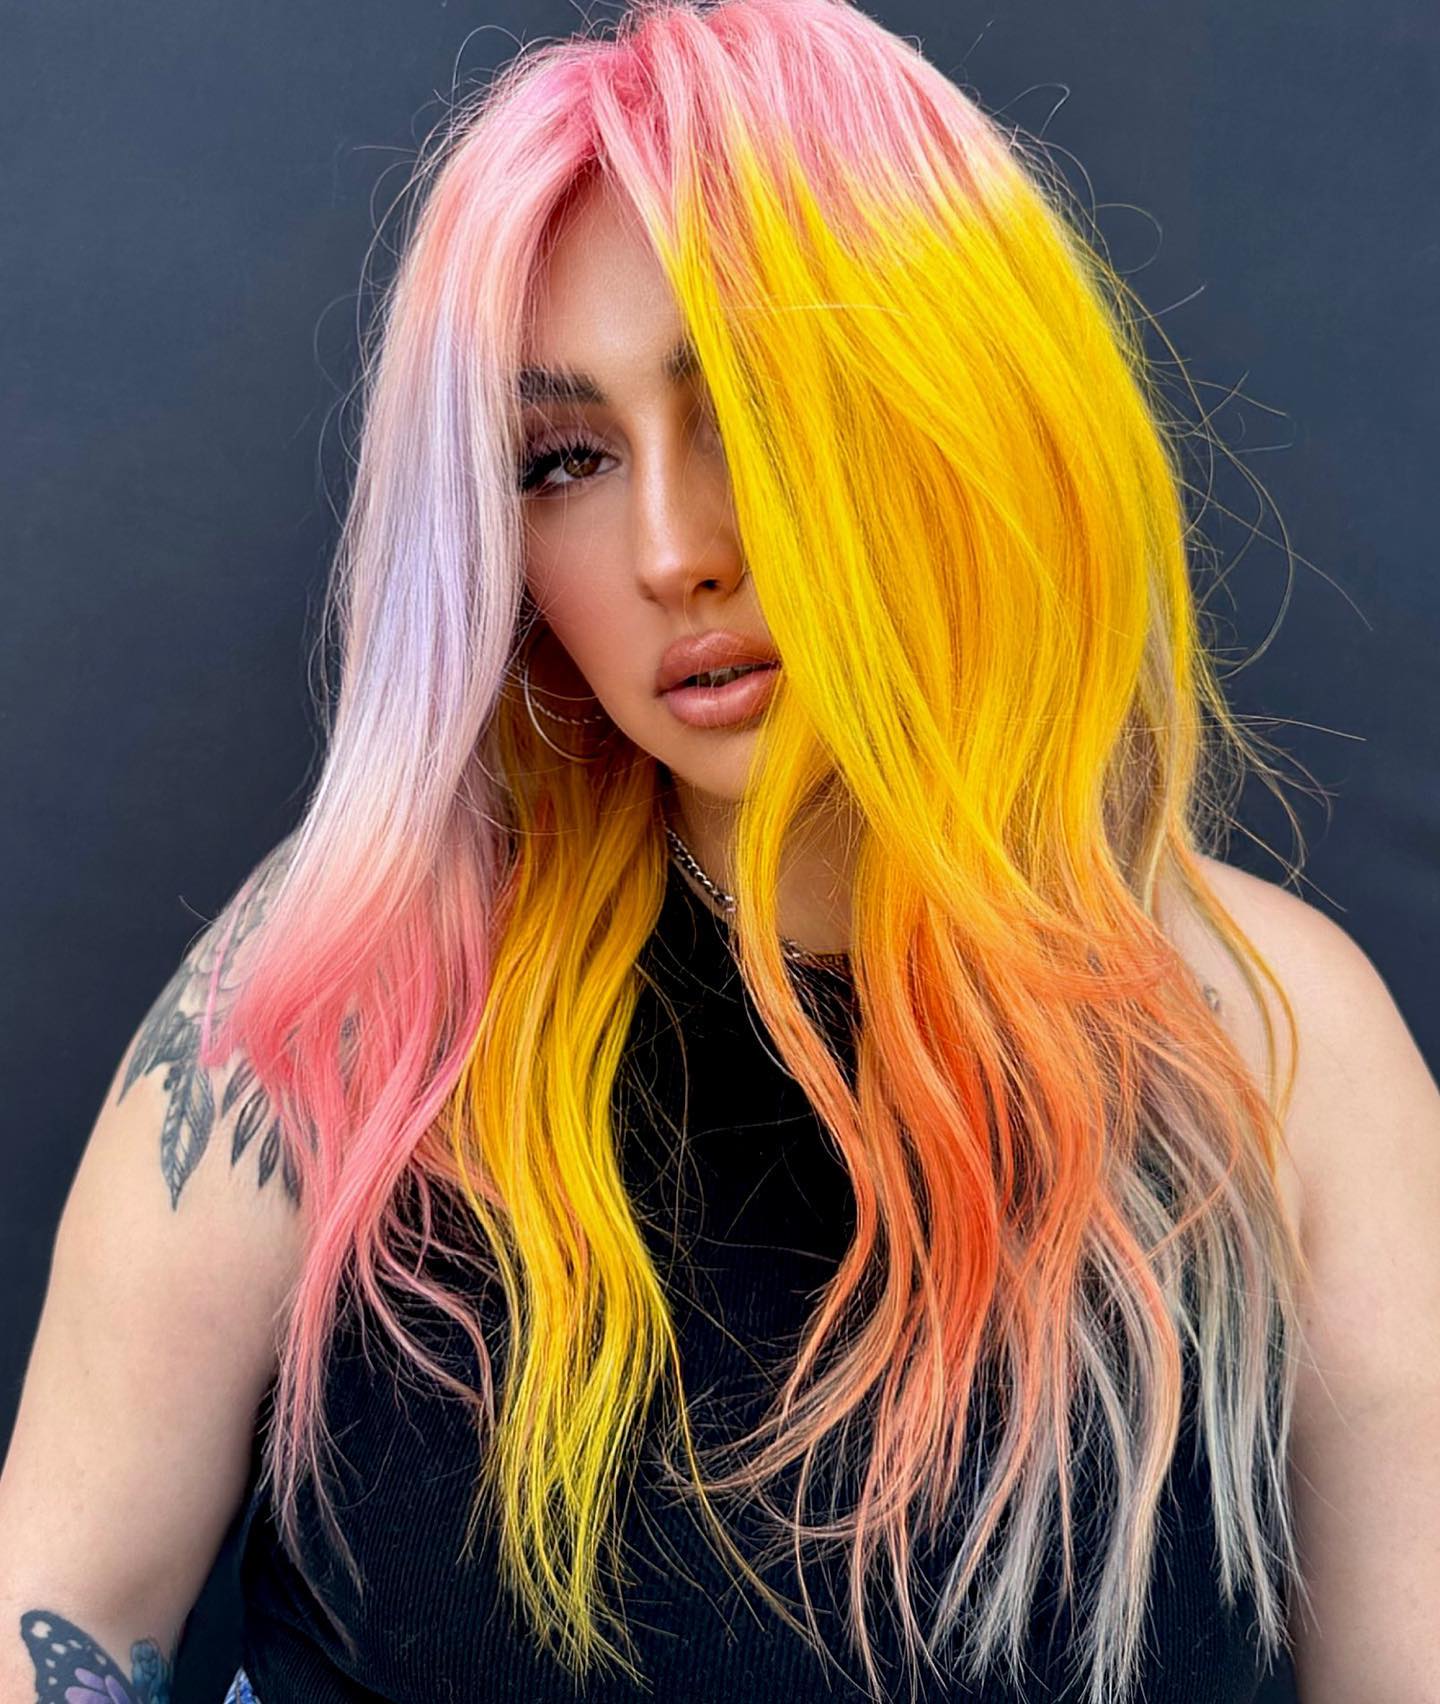 100+ Best Colorful Hair Ideas images 23